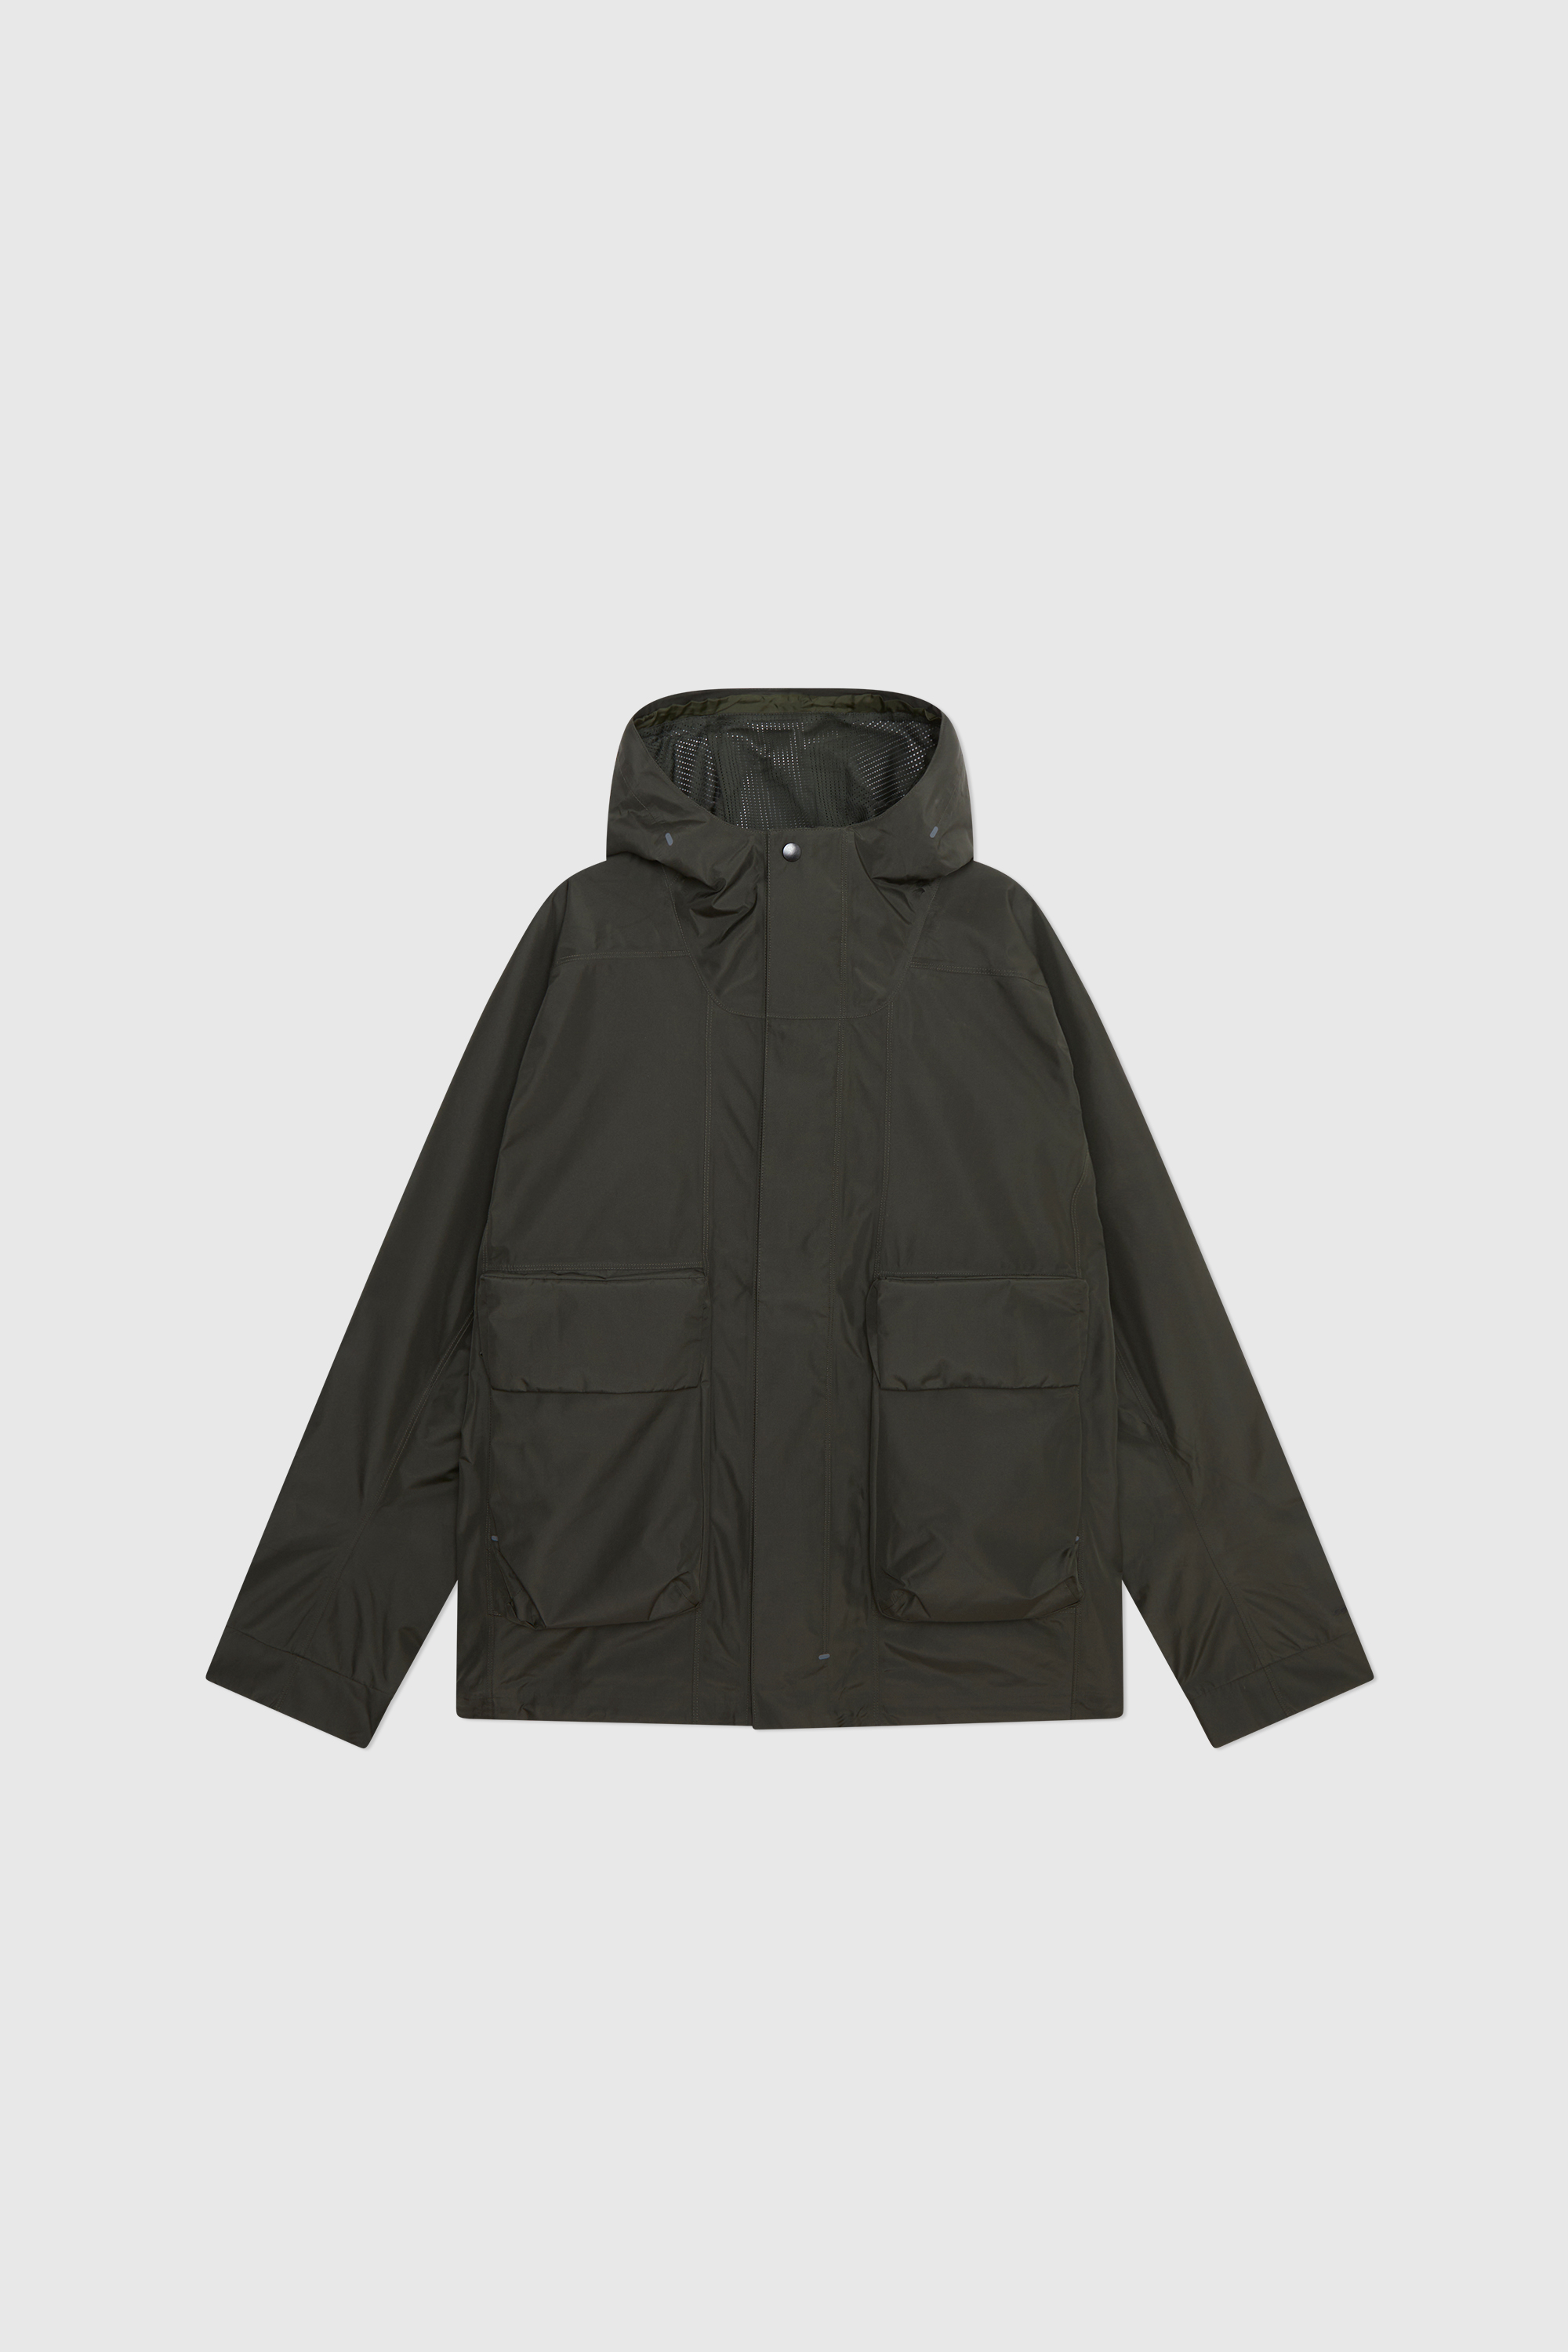 Nike Tech pack storm-fit Gore-Tex jacket